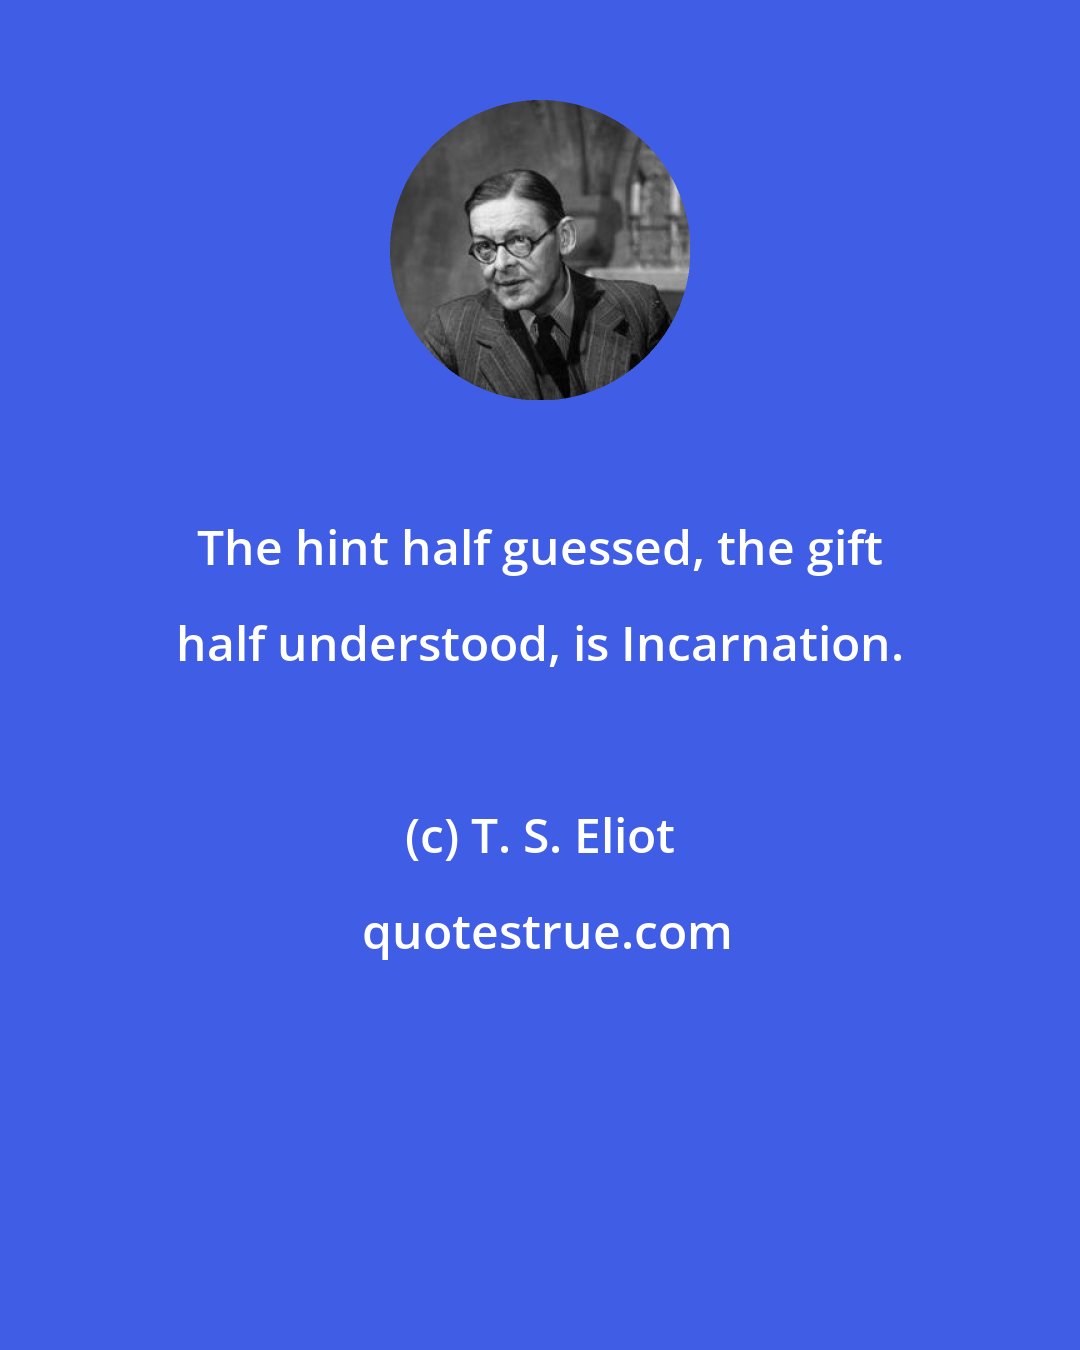 T. S. Eliot: The hint half guessed, the gift half understood, is Incarnation.